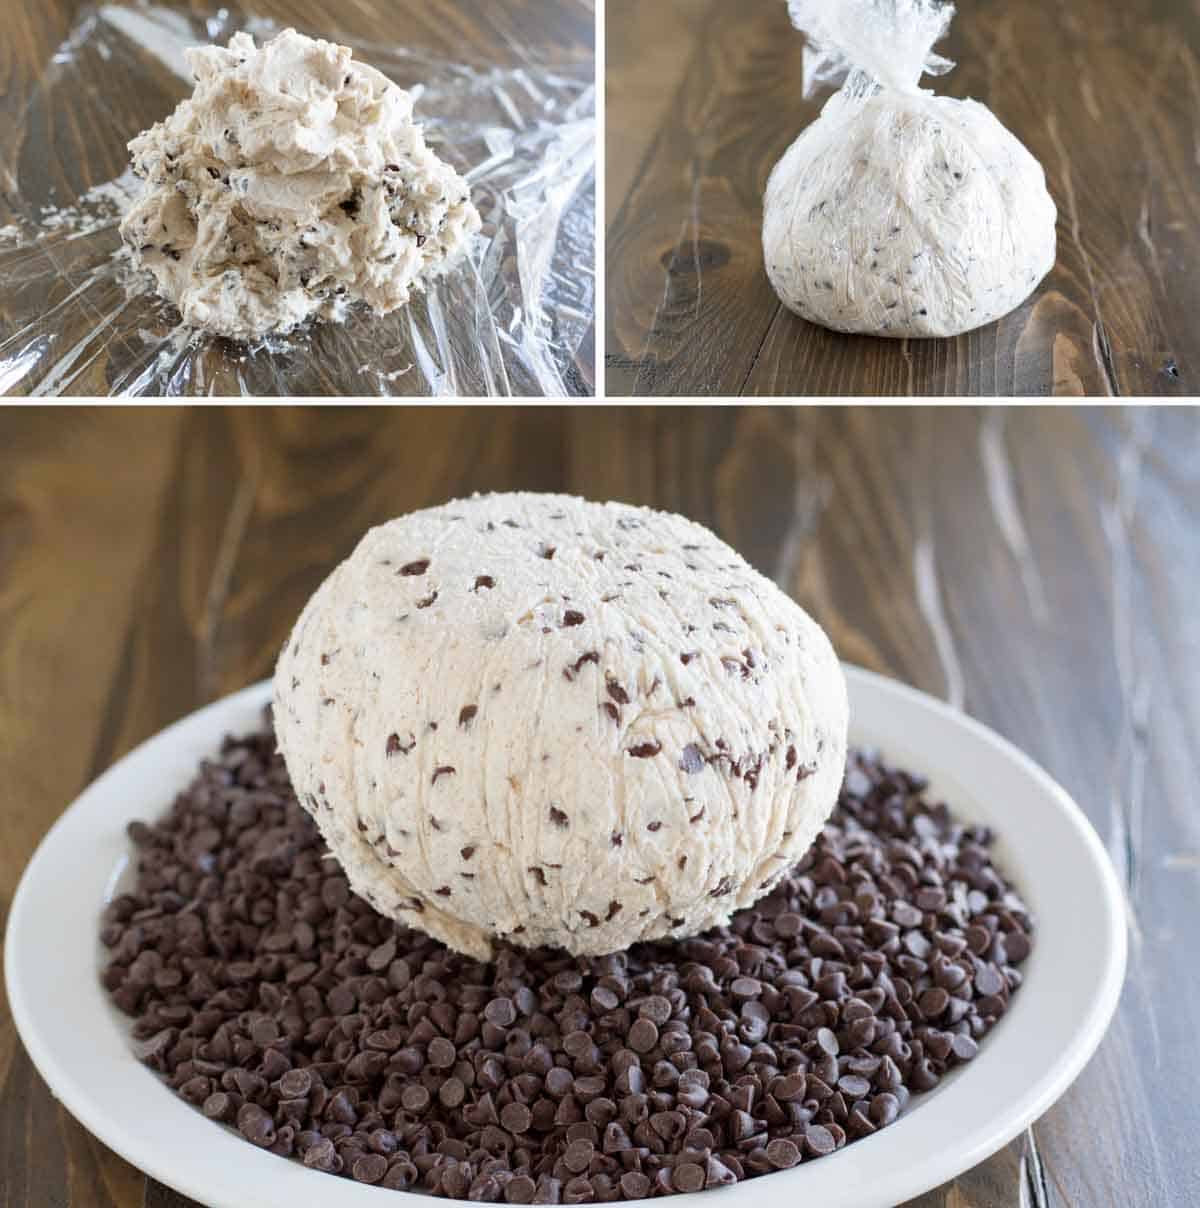 Steps to make a cannoli cheese ball.